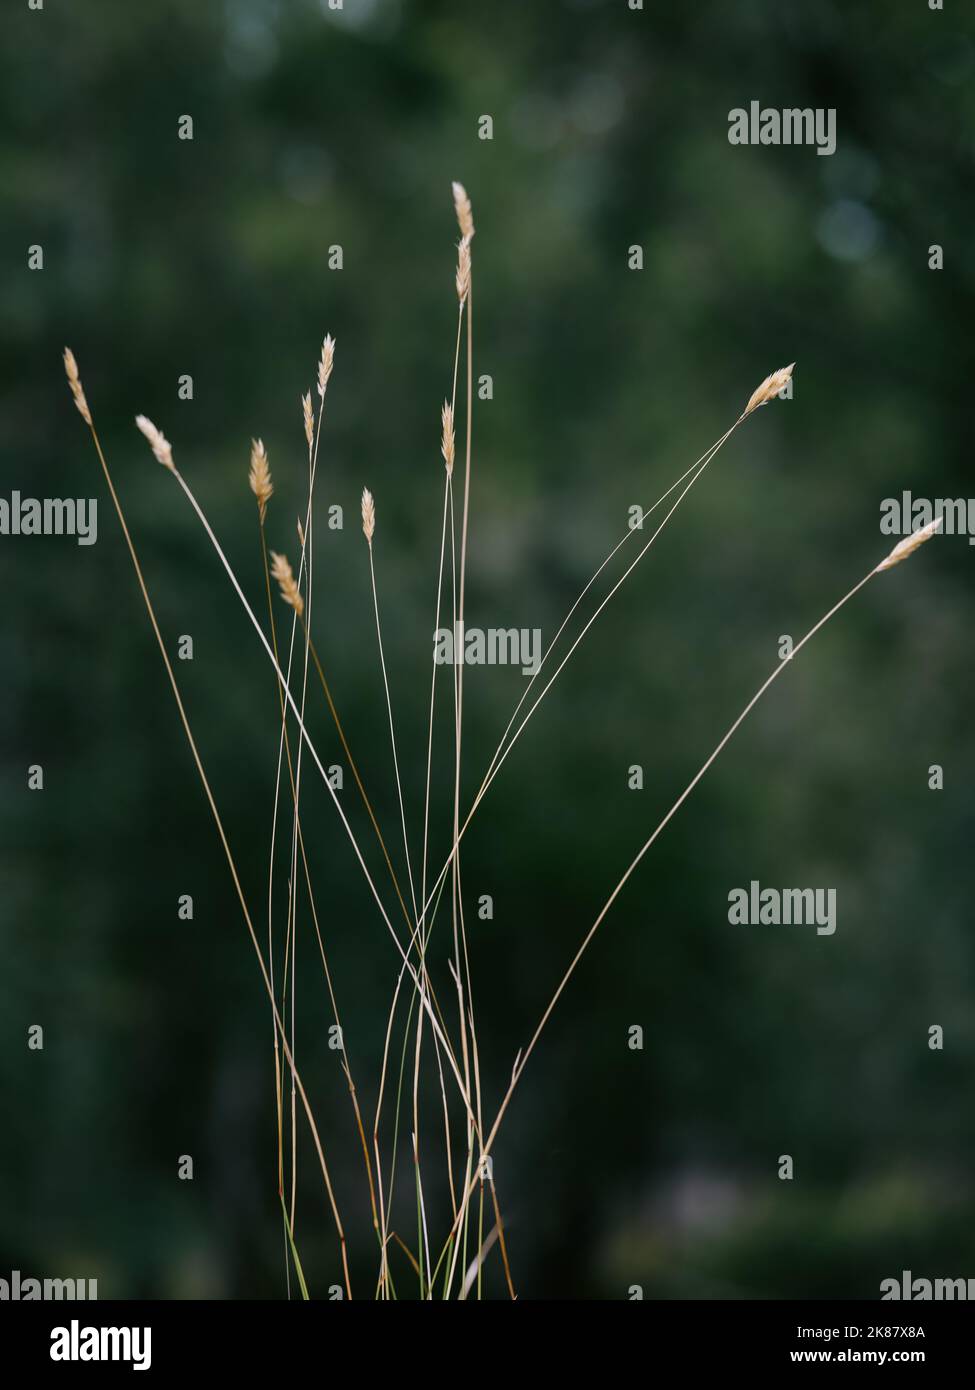 A simple long grass with seed heads nature background. Stock Photo